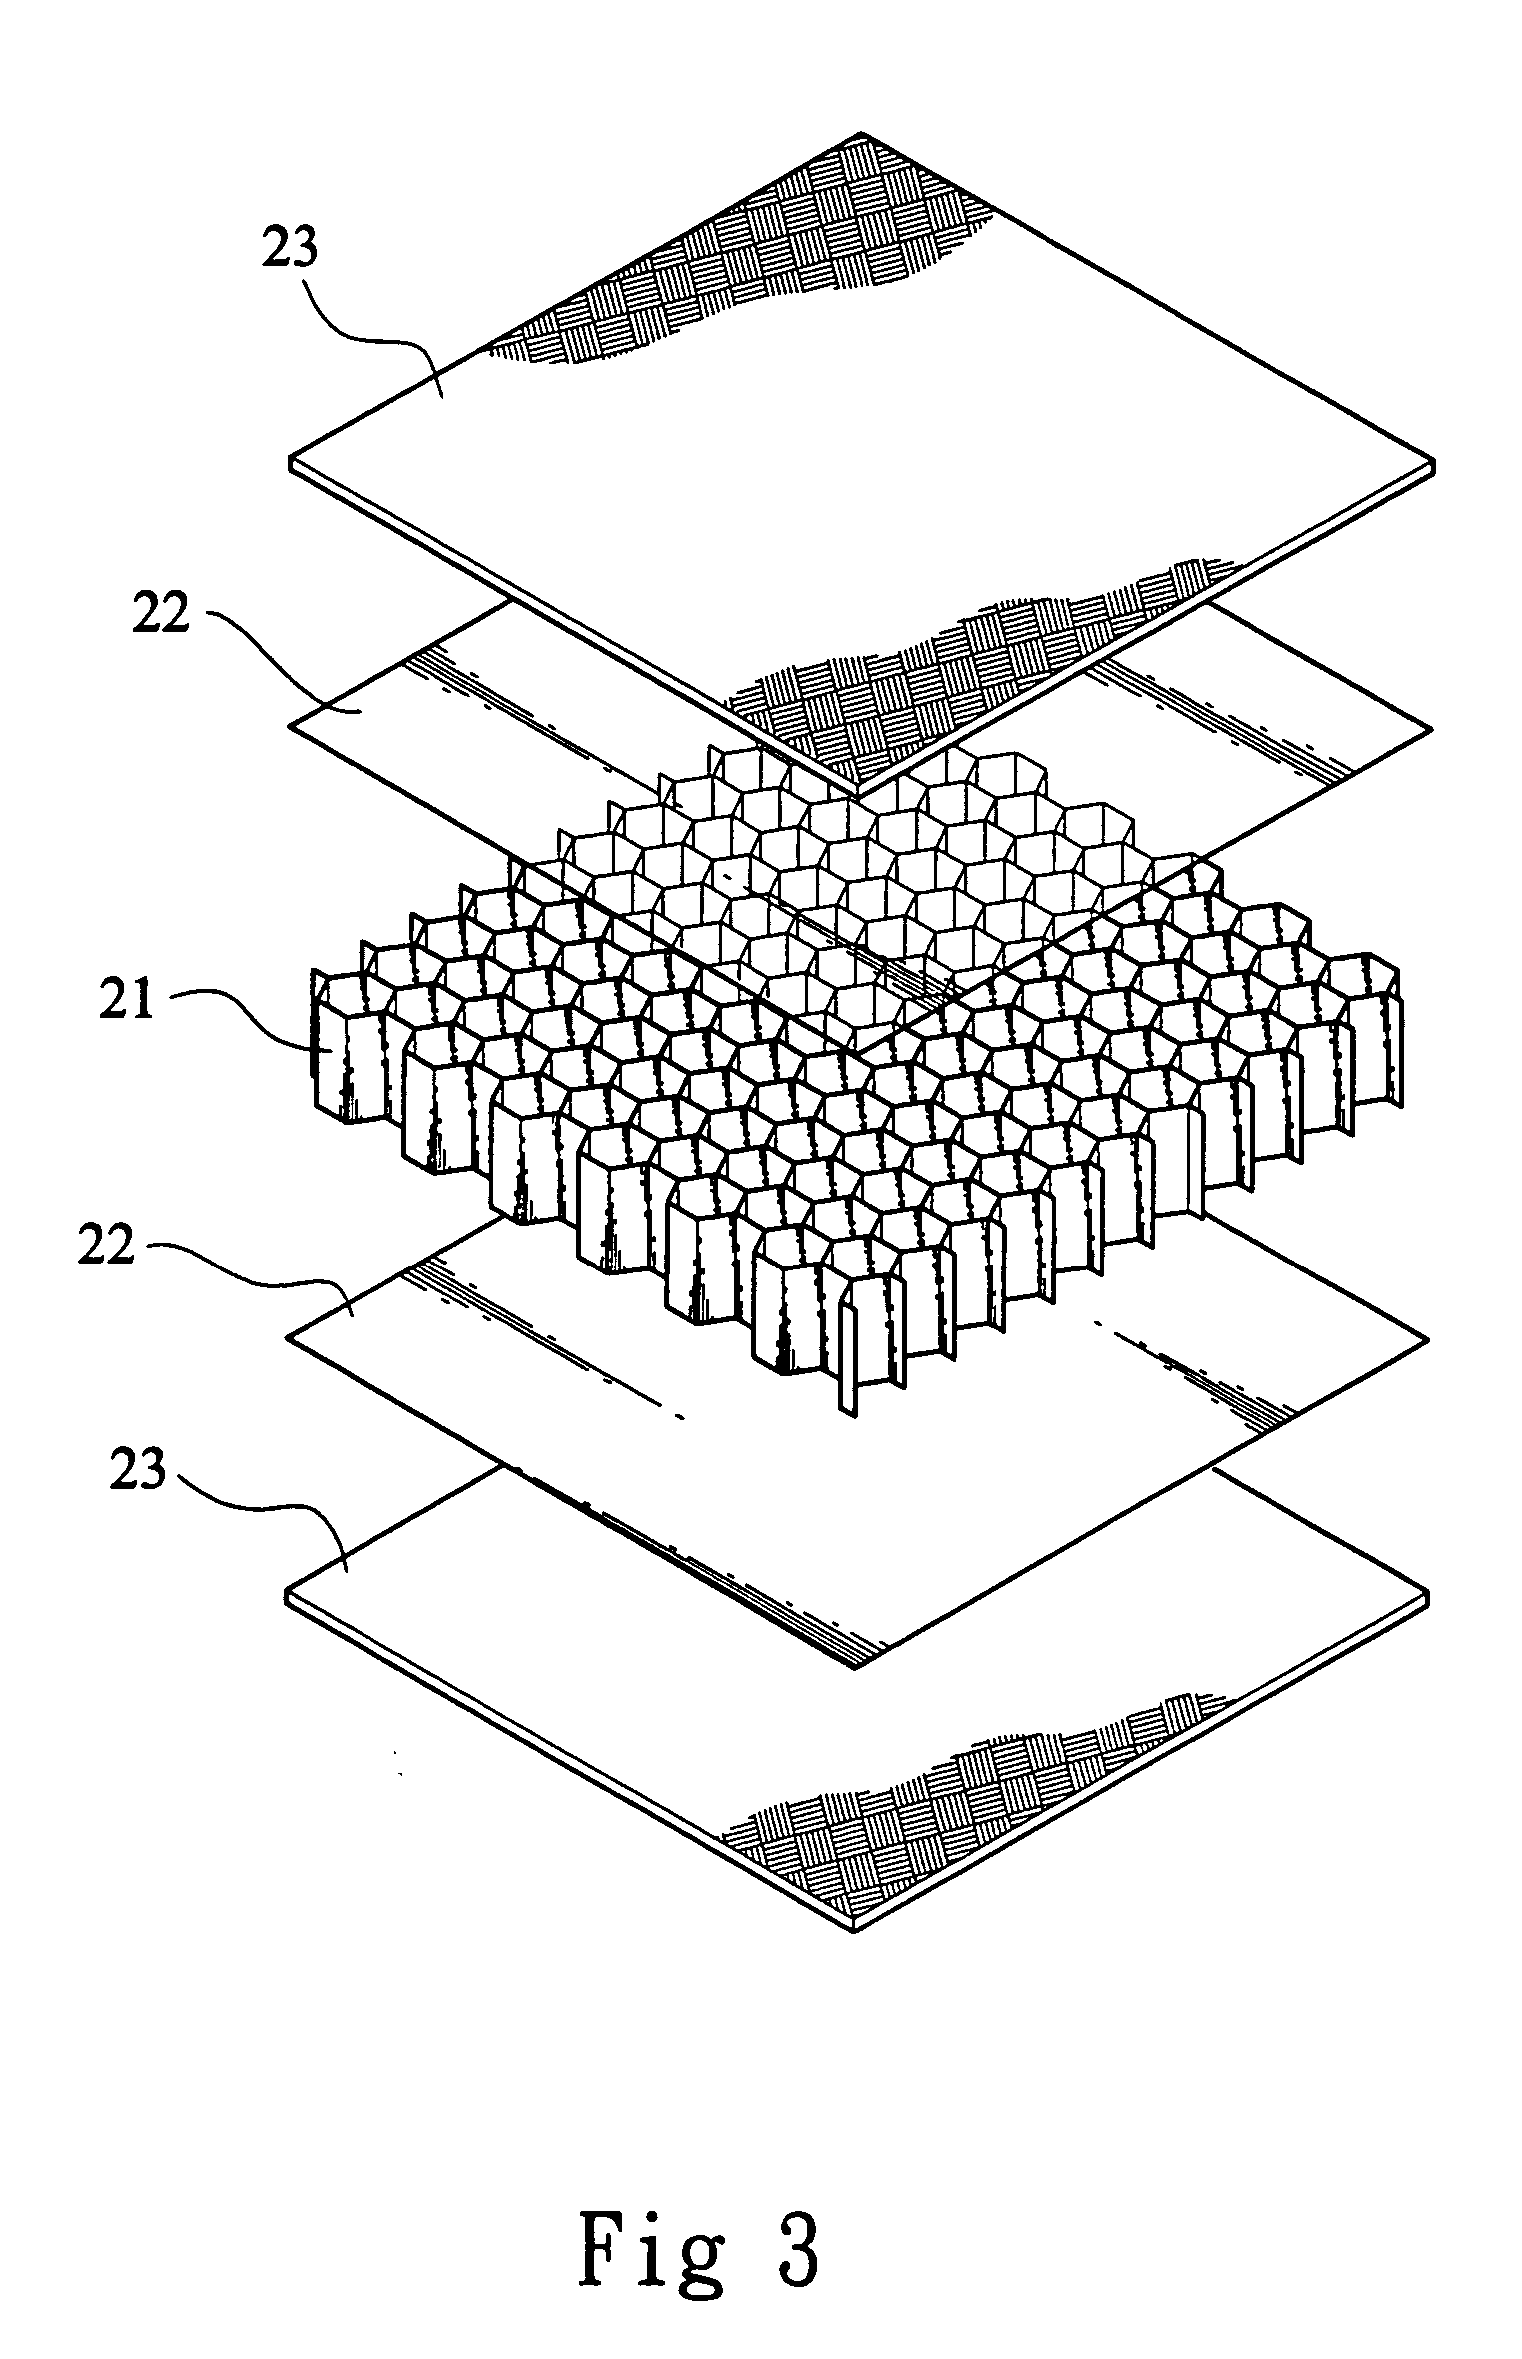 Sealing of honeycomb core and the honeycomb core assembly made with the same